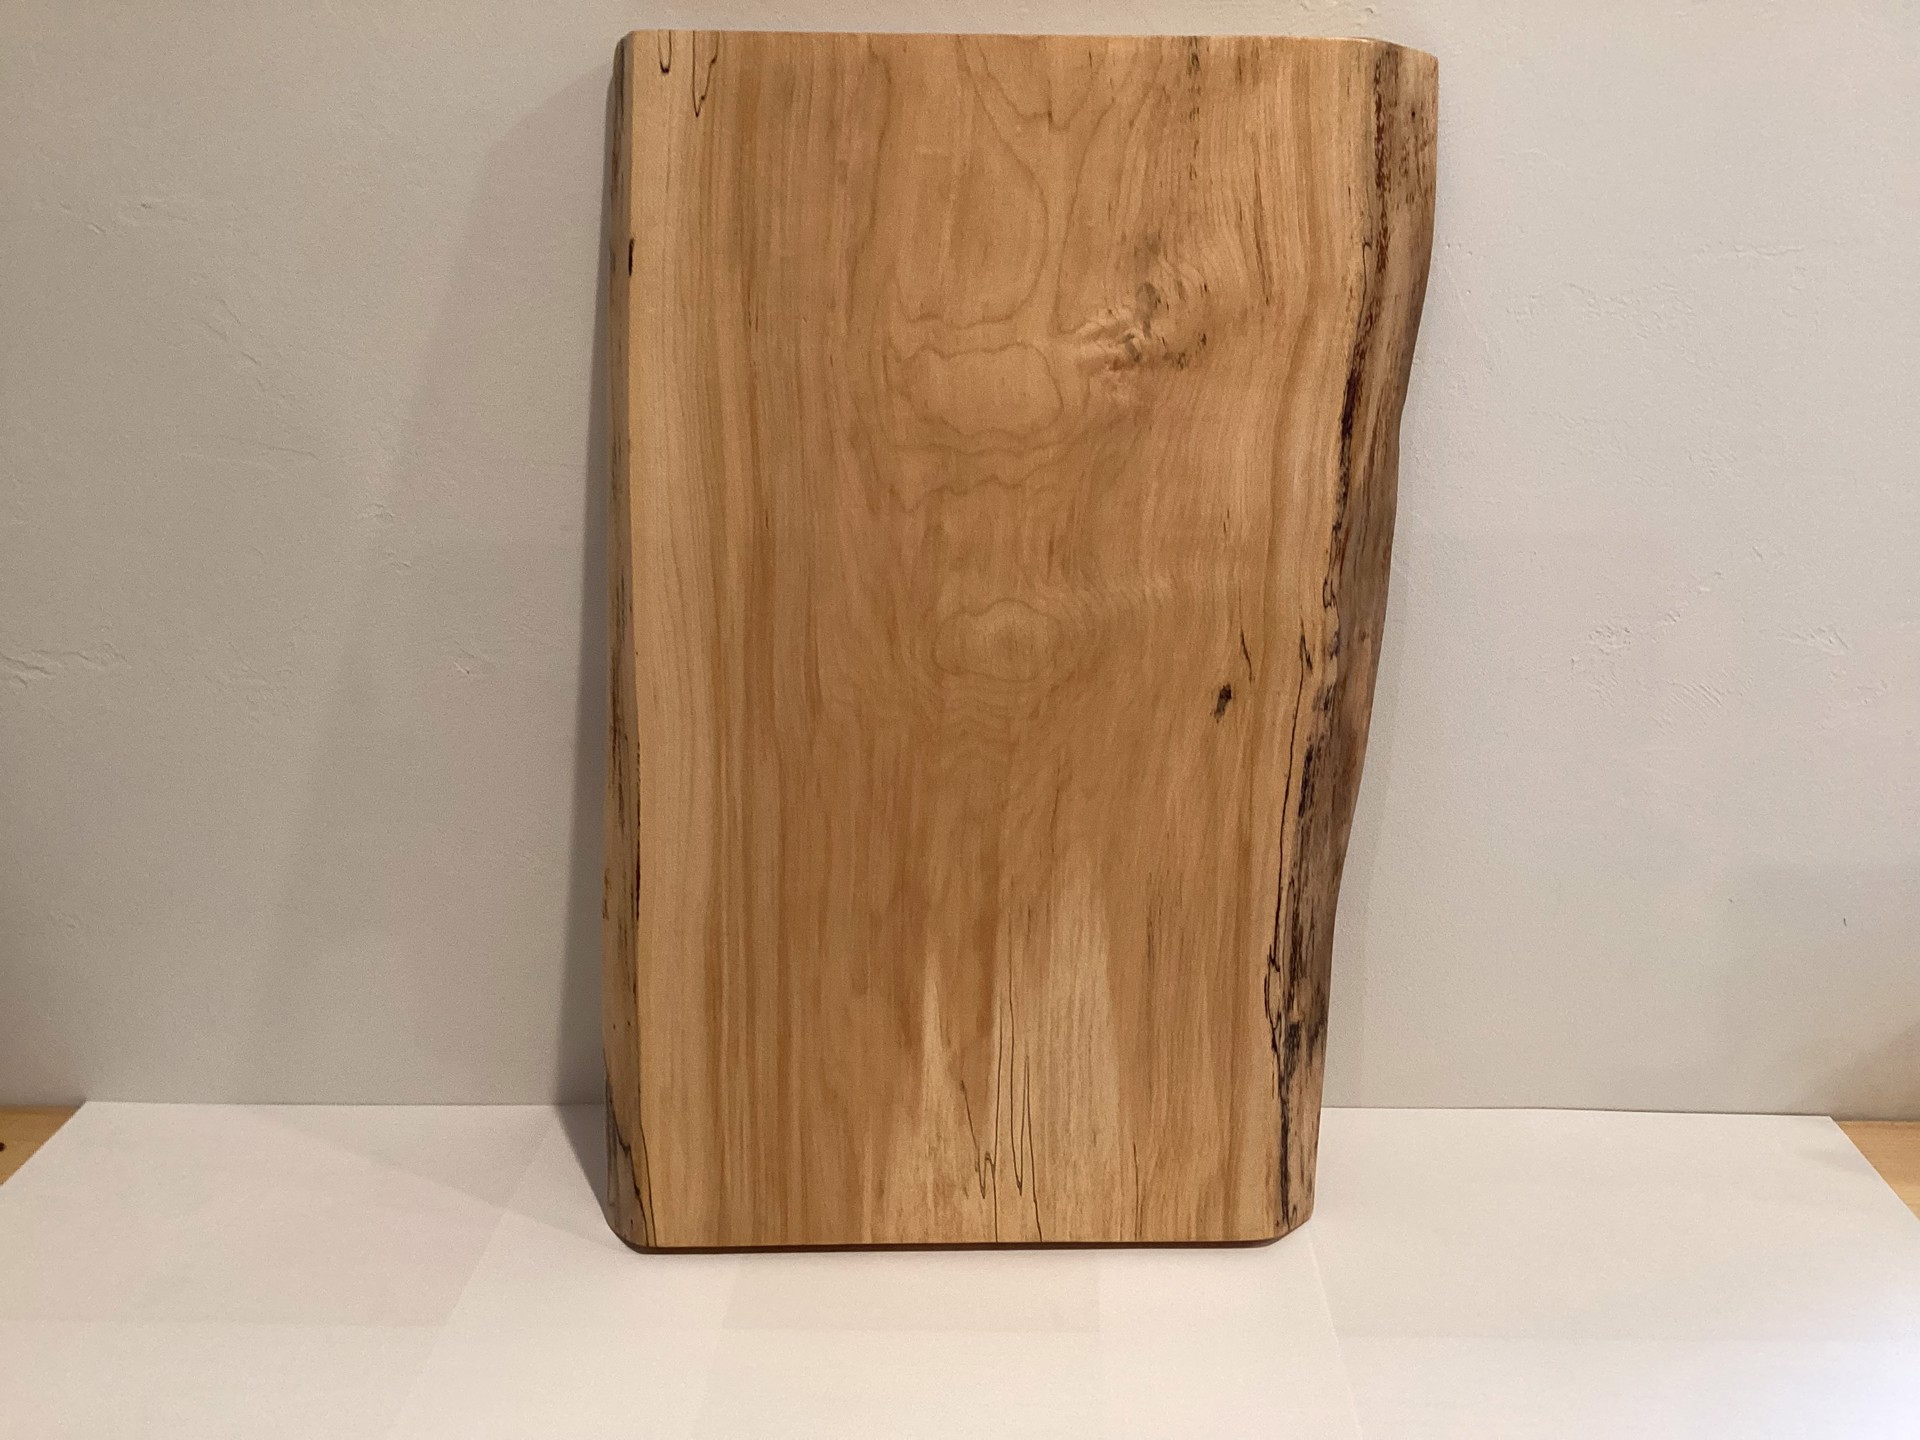 #151 Maple Serving Board by Rustics by Design